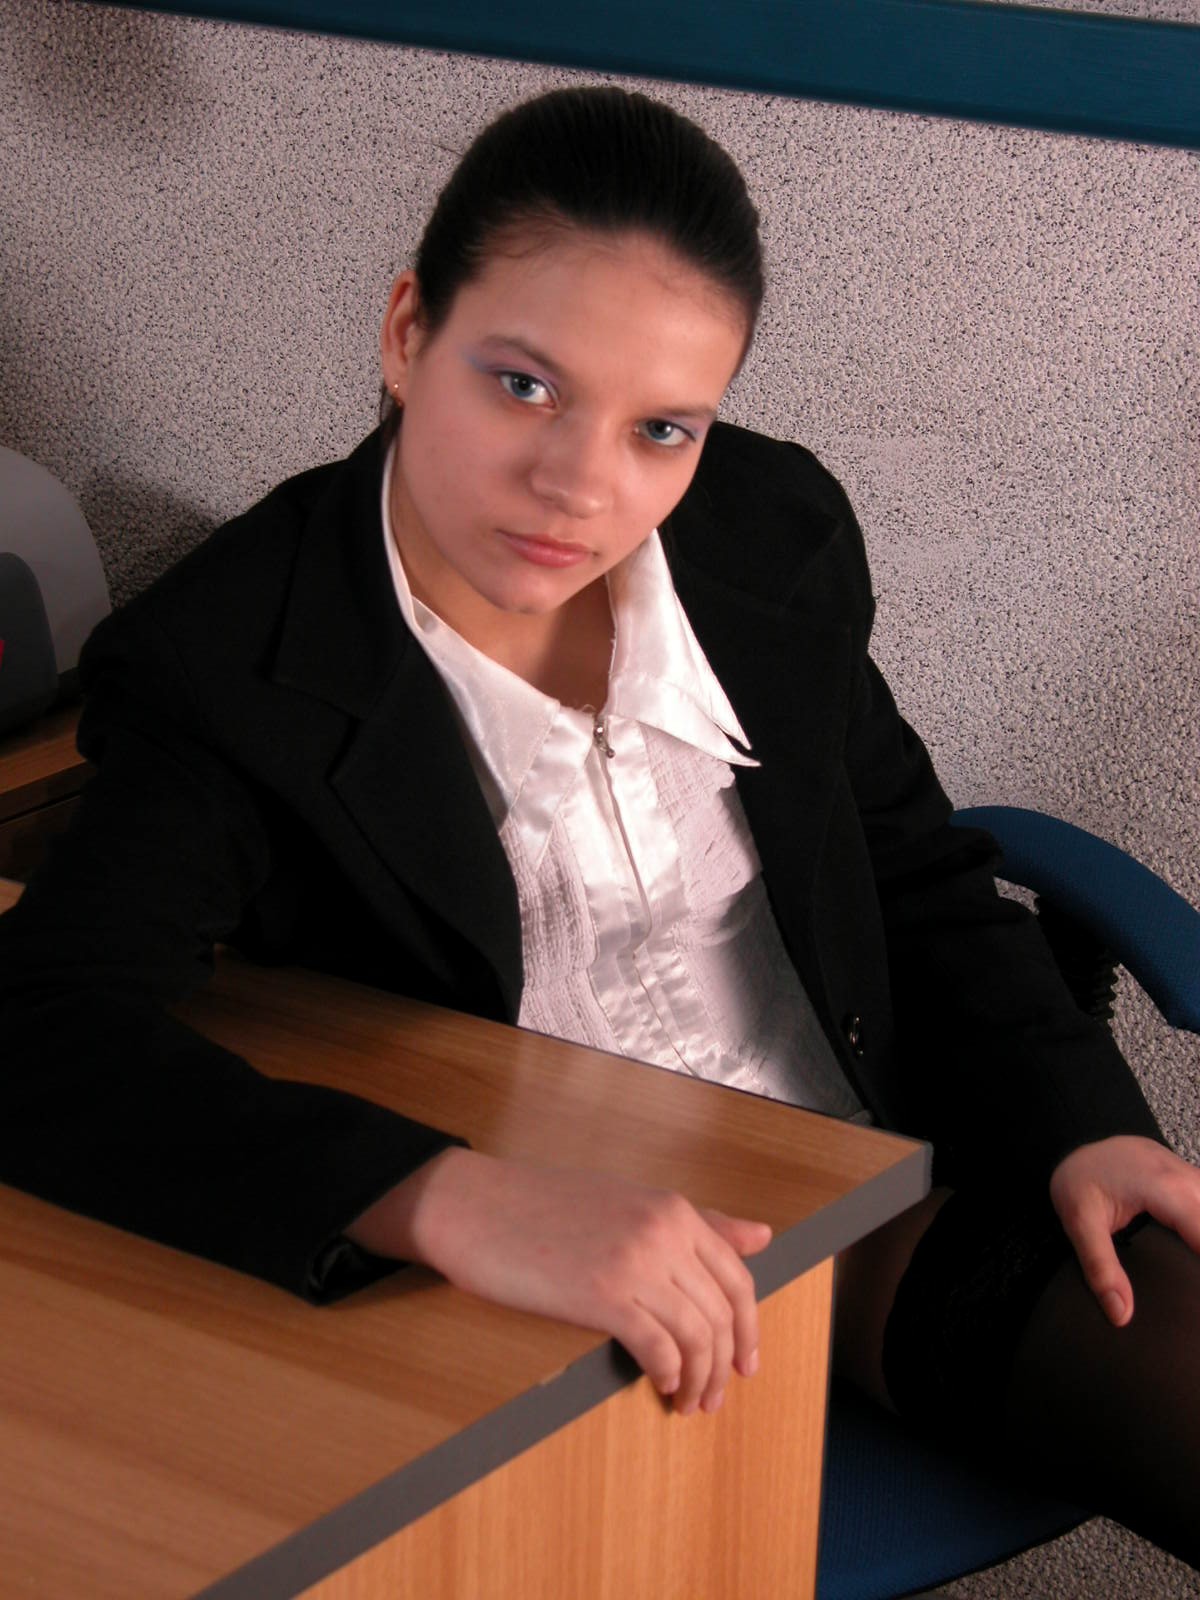 Hot babe undresses in the office